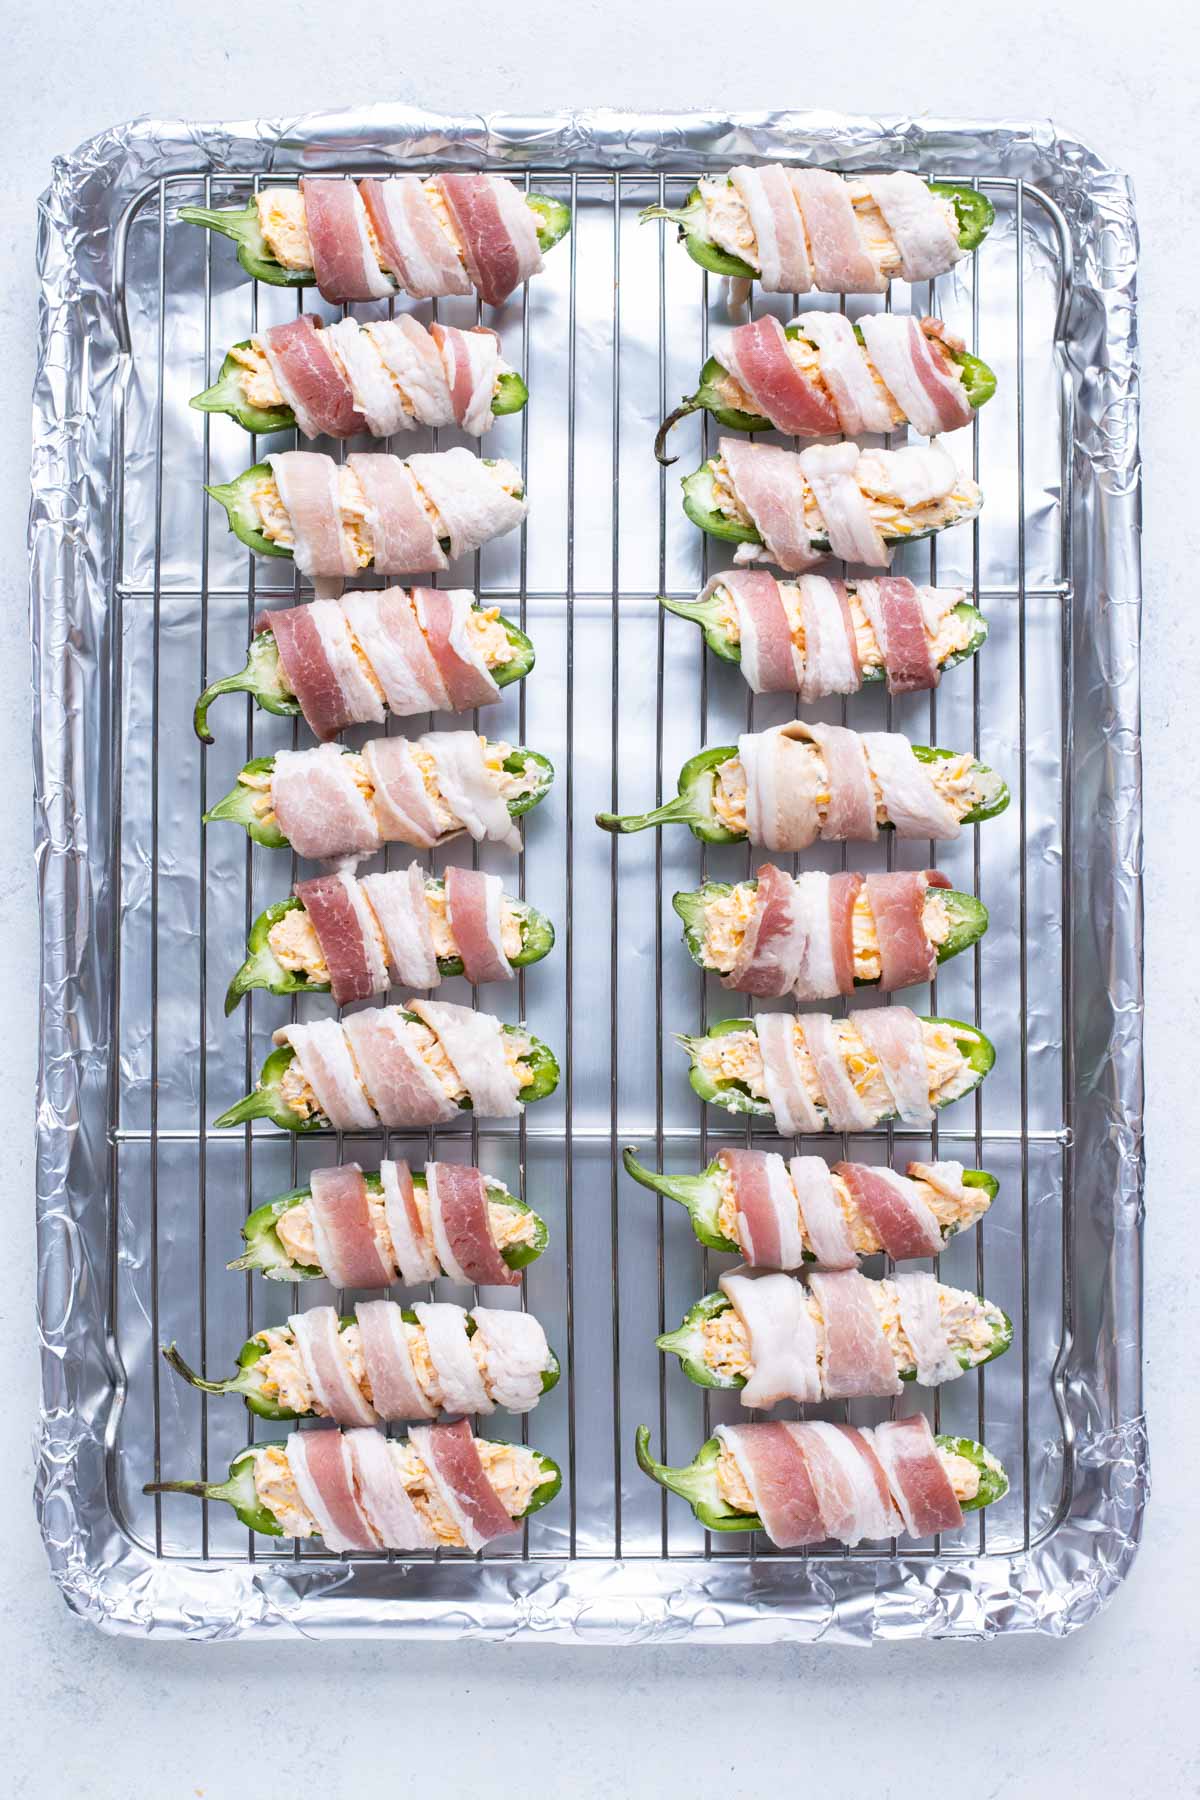 All of the wrapped jalapeno poppers are placed on a baking sheet.